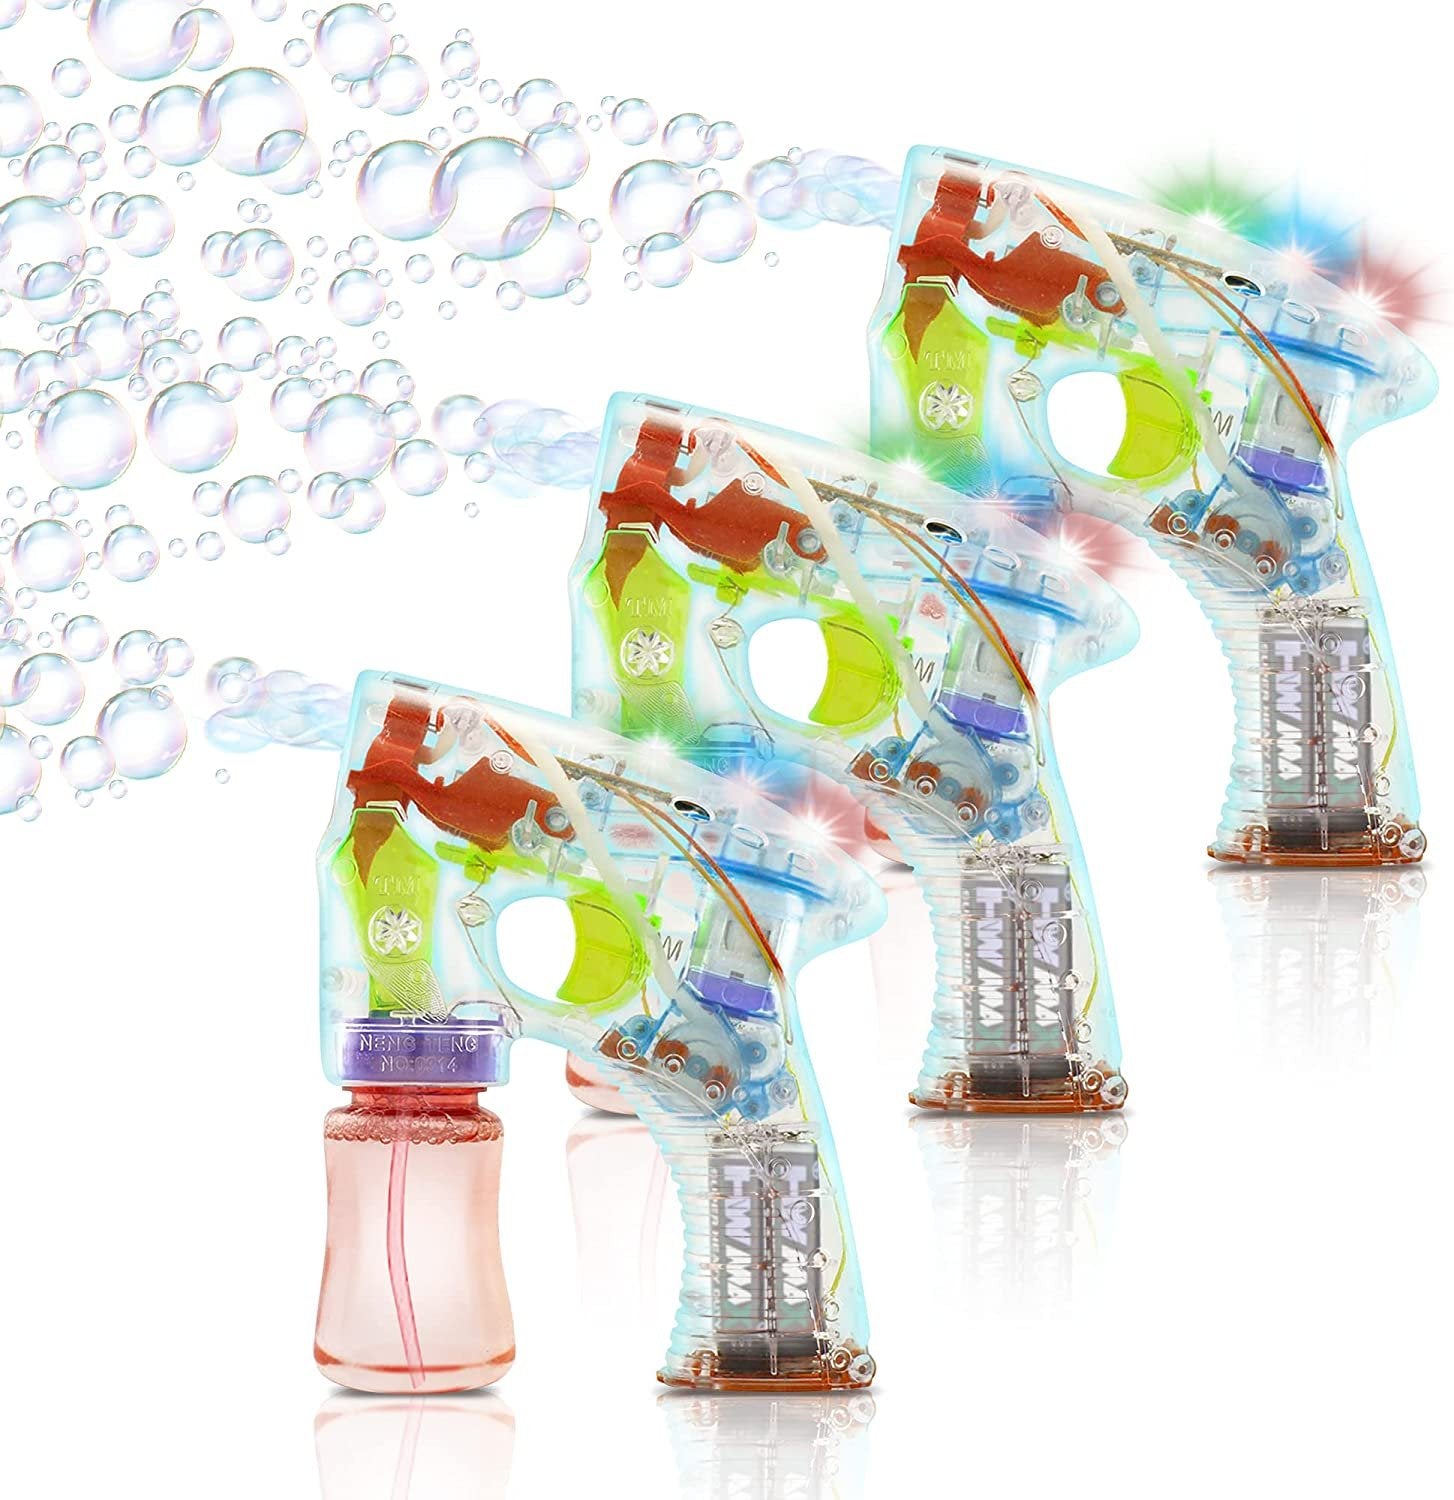 Light Up Bubble Gun - Set of 3 - Medium Lightweight Design - Perfect for Summertime - Fun, Engaging and Entertaining - Party Favor, Amazing Gift Idea Boys Girls - Batteries Included